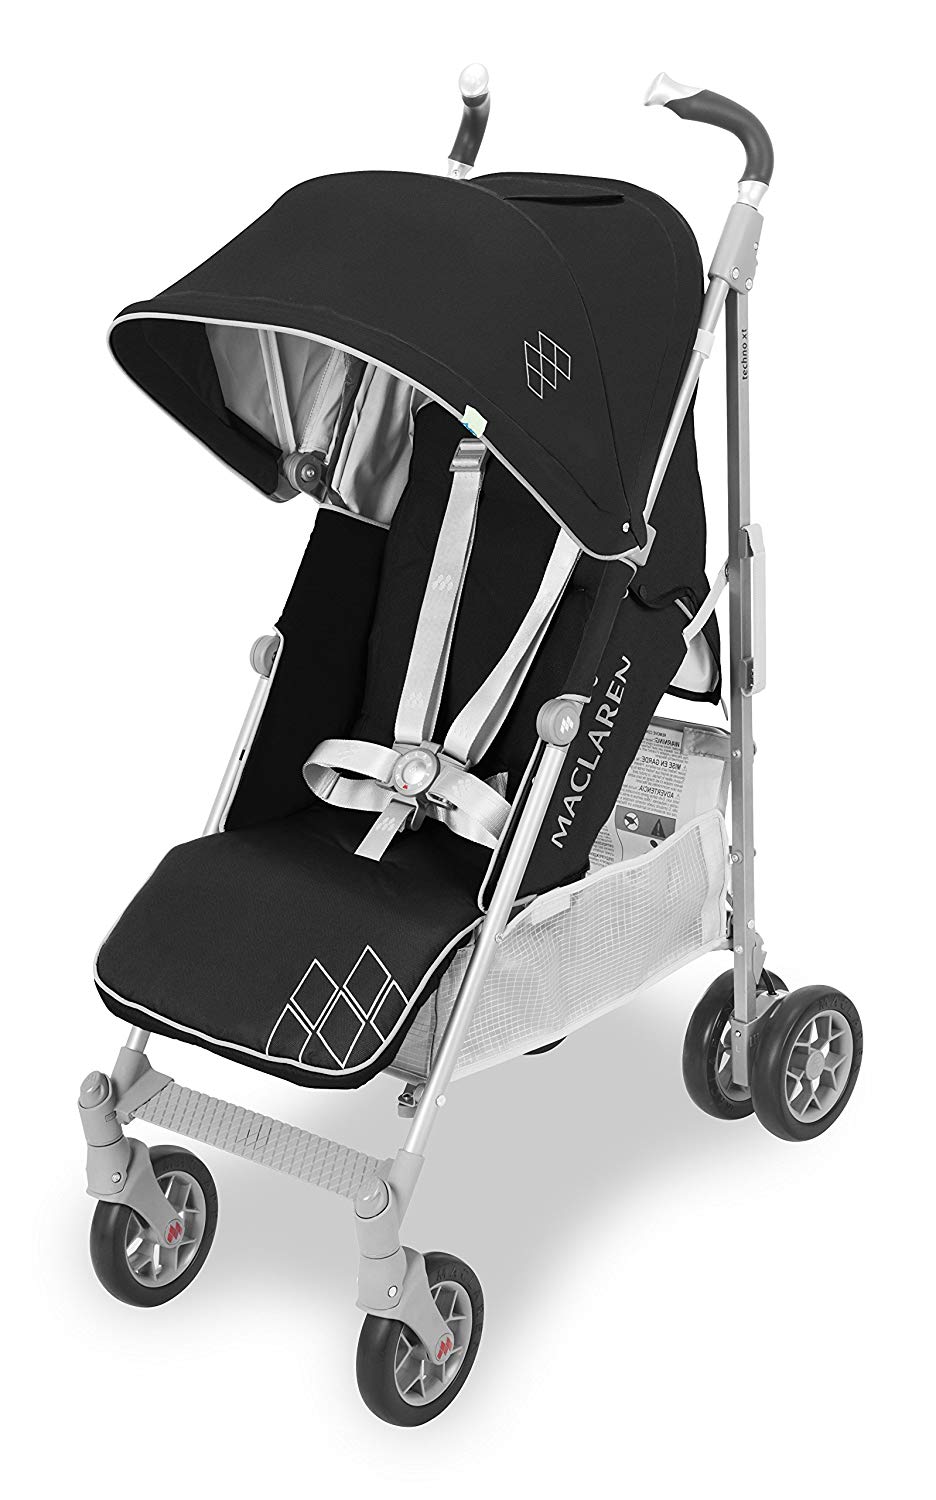 Maclaren Techno XT Buggy - Fully equipped, lightweight and compact. For newborns and children up to 25 kg. Newborn Safety System™, retractable UPF50+/waterproof canopy, Sovereign™ Lifetime Warranty